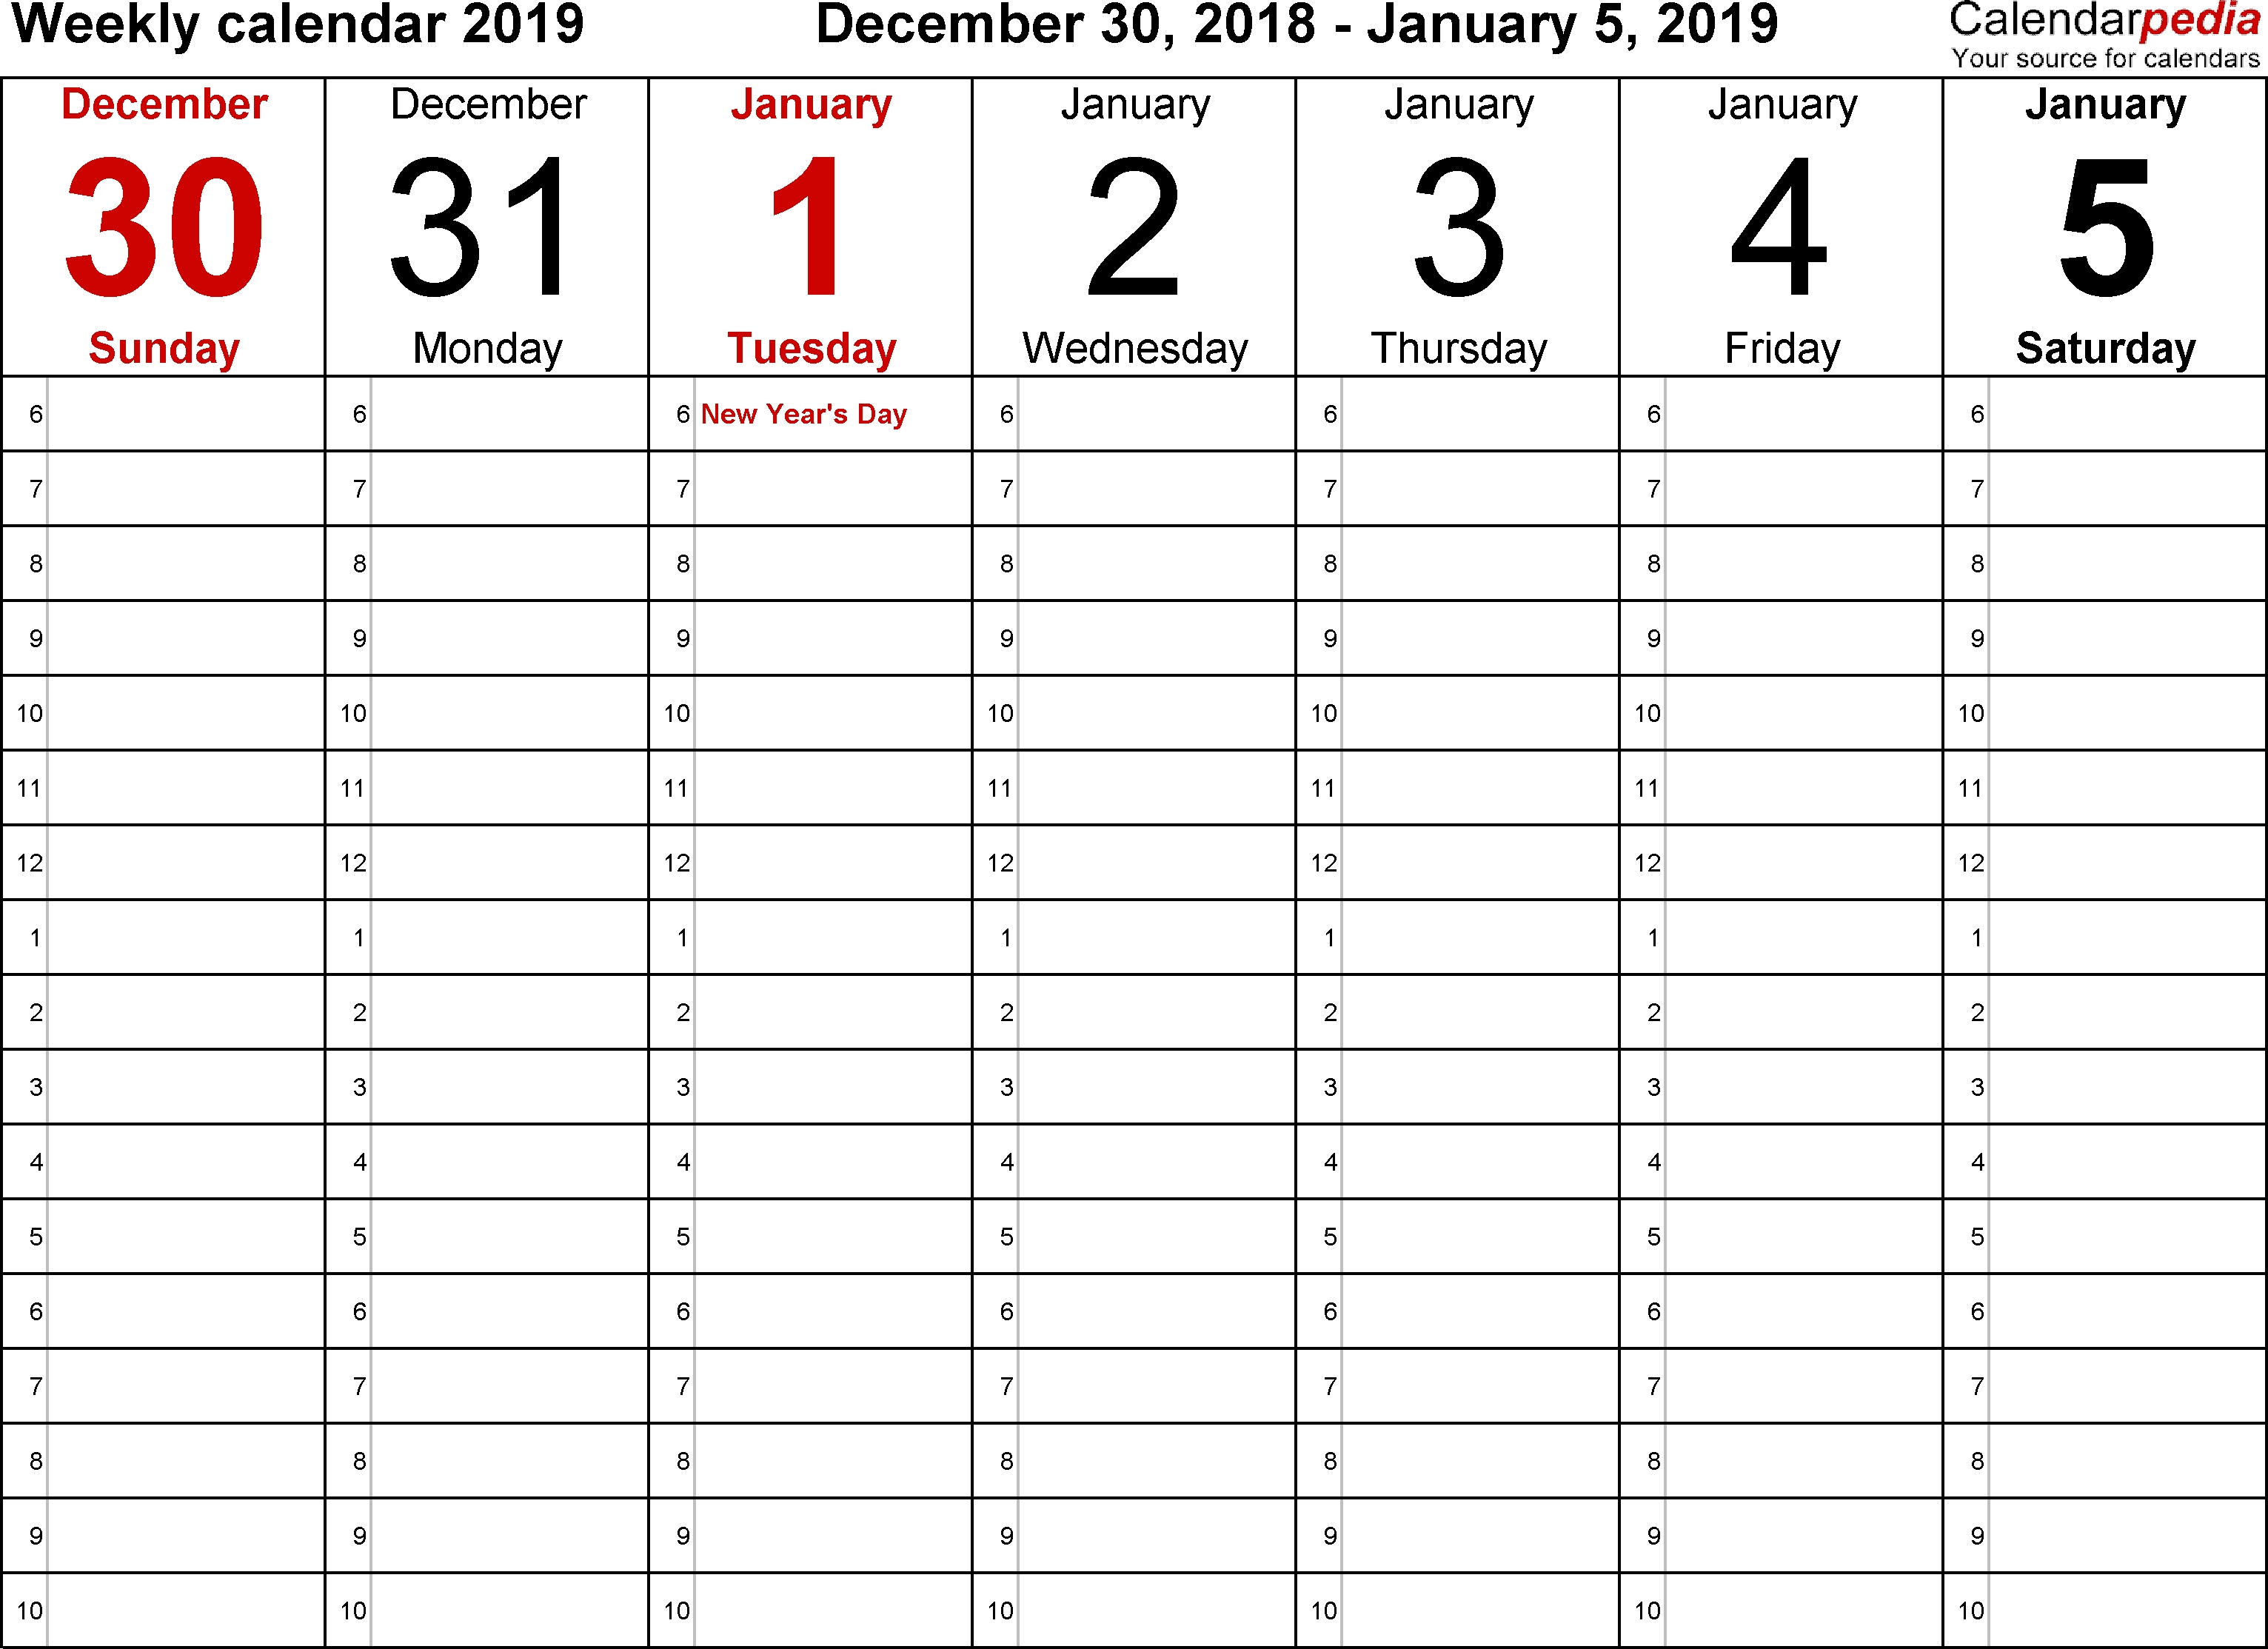 Weekly Calendar 2019 For Word - 12 Free Printable Templates within Blank Calendar Printable With Times